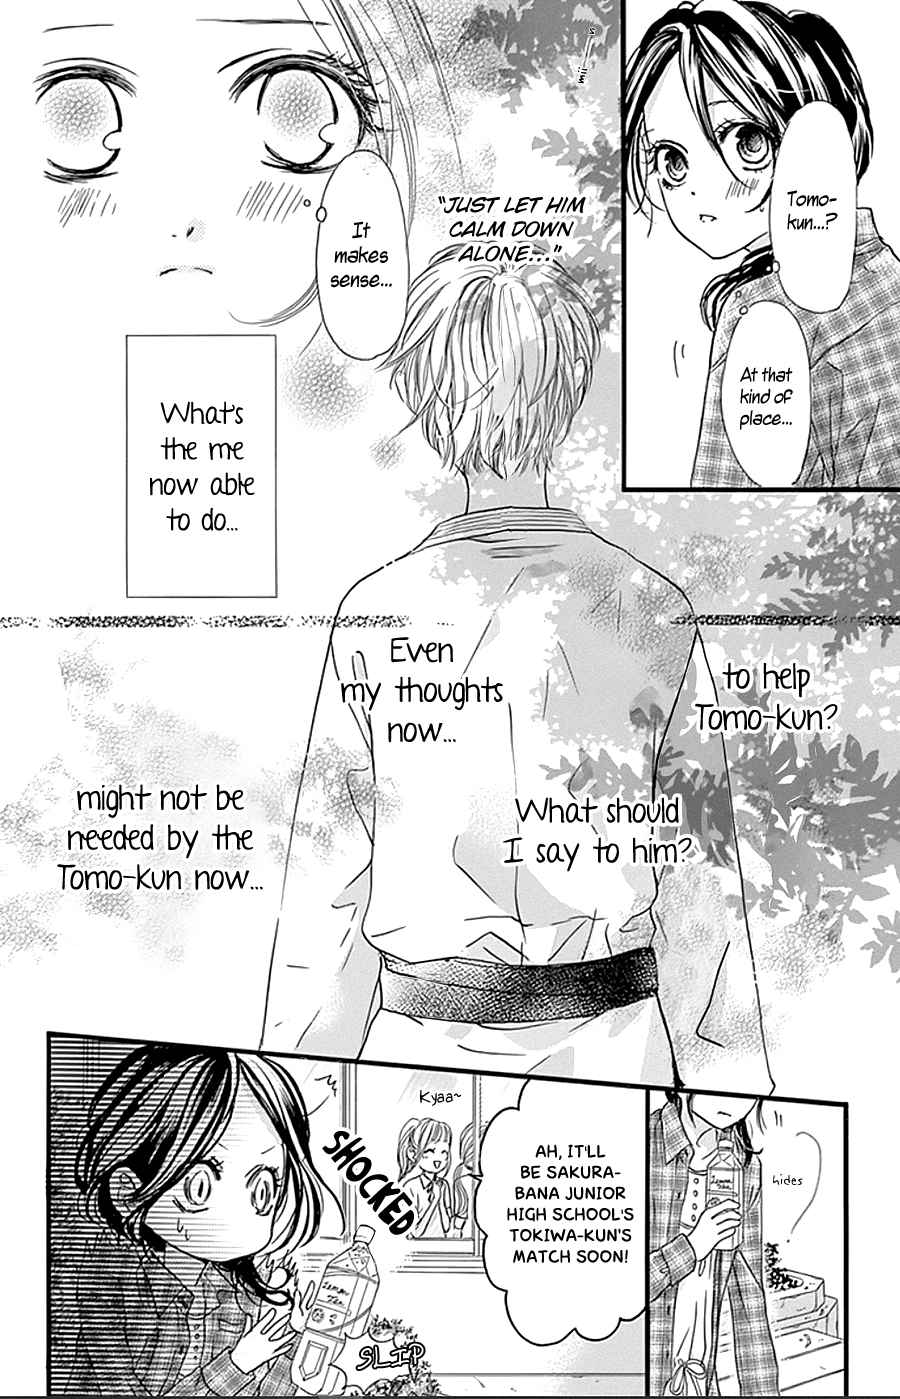 I Love You Baby Vol. 2 Ch. 12